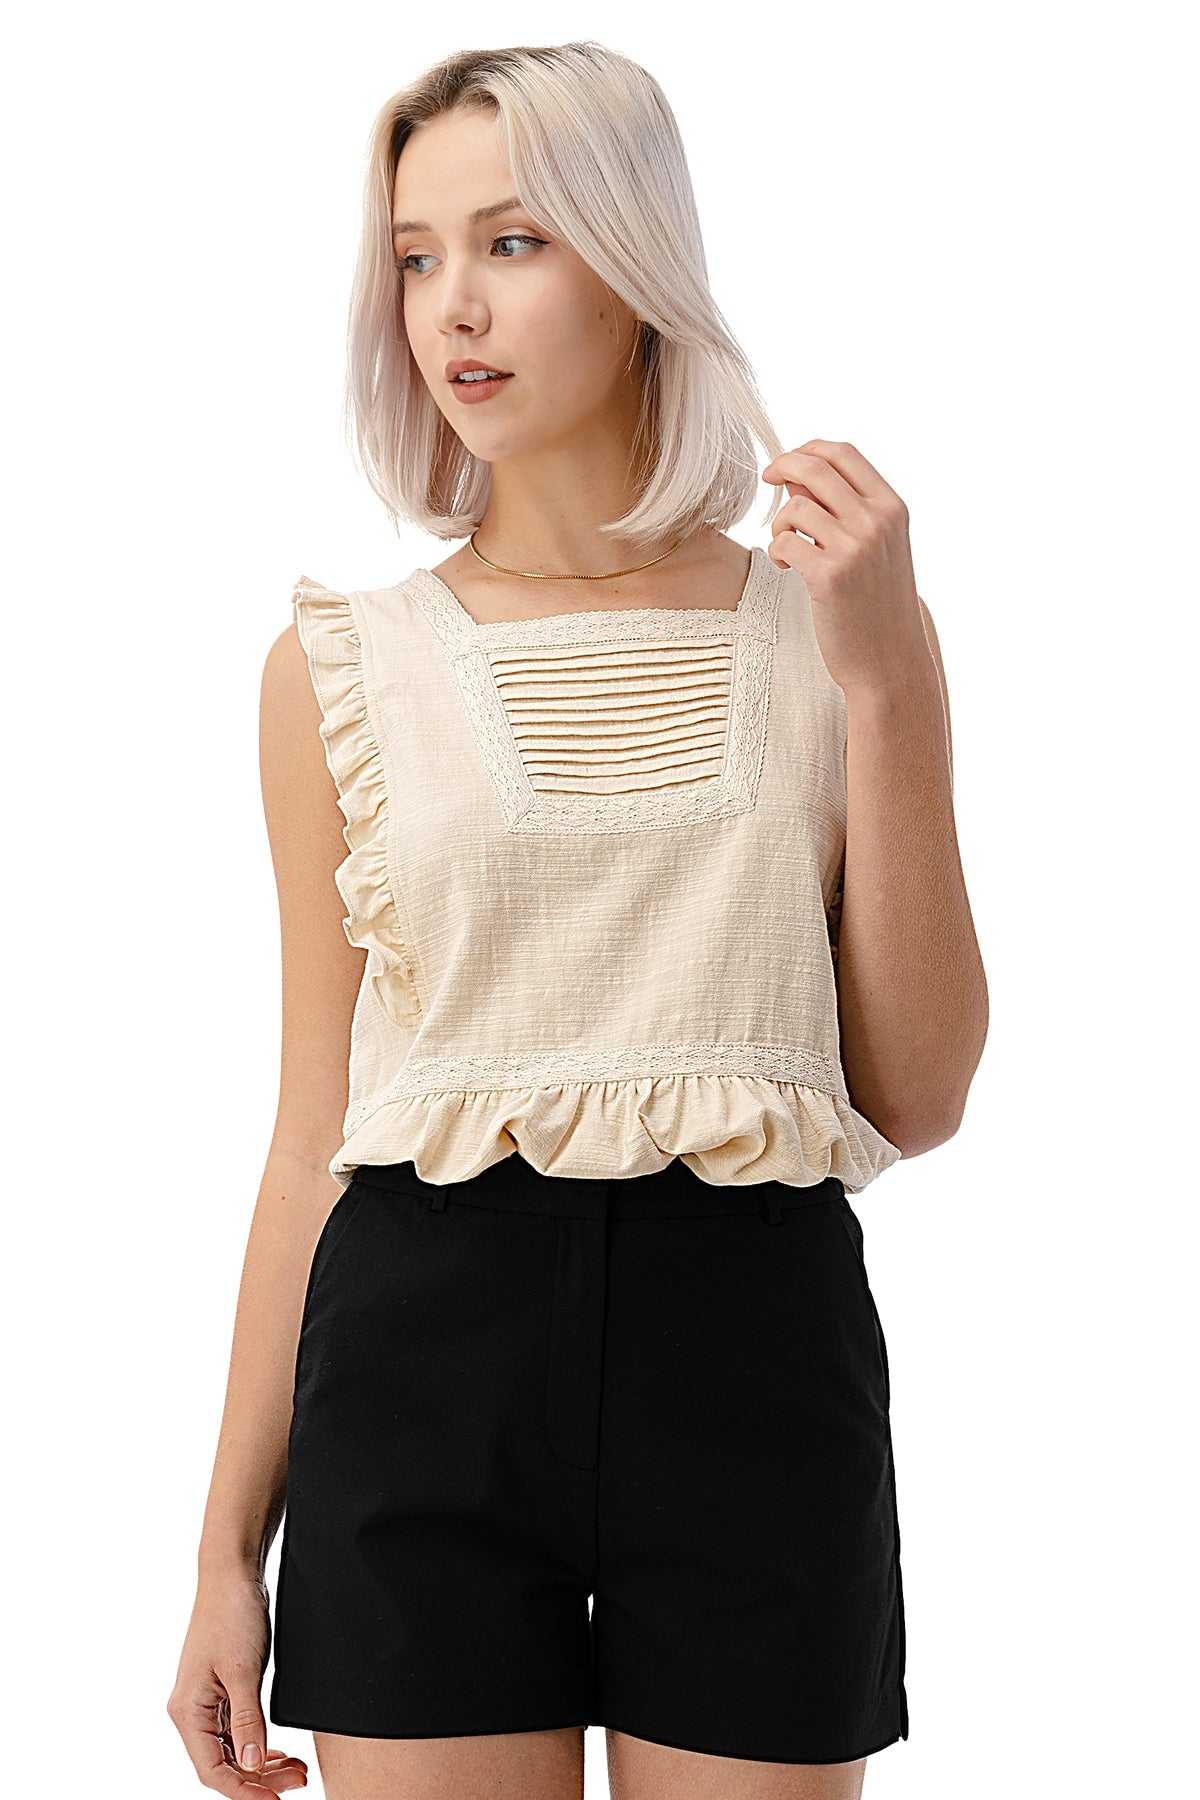 EDGY Land Girl's and Women's Ruffled Armhole Pin tucked Chest with Beautiful Lace Trim Sleeveless Fashion Blouse